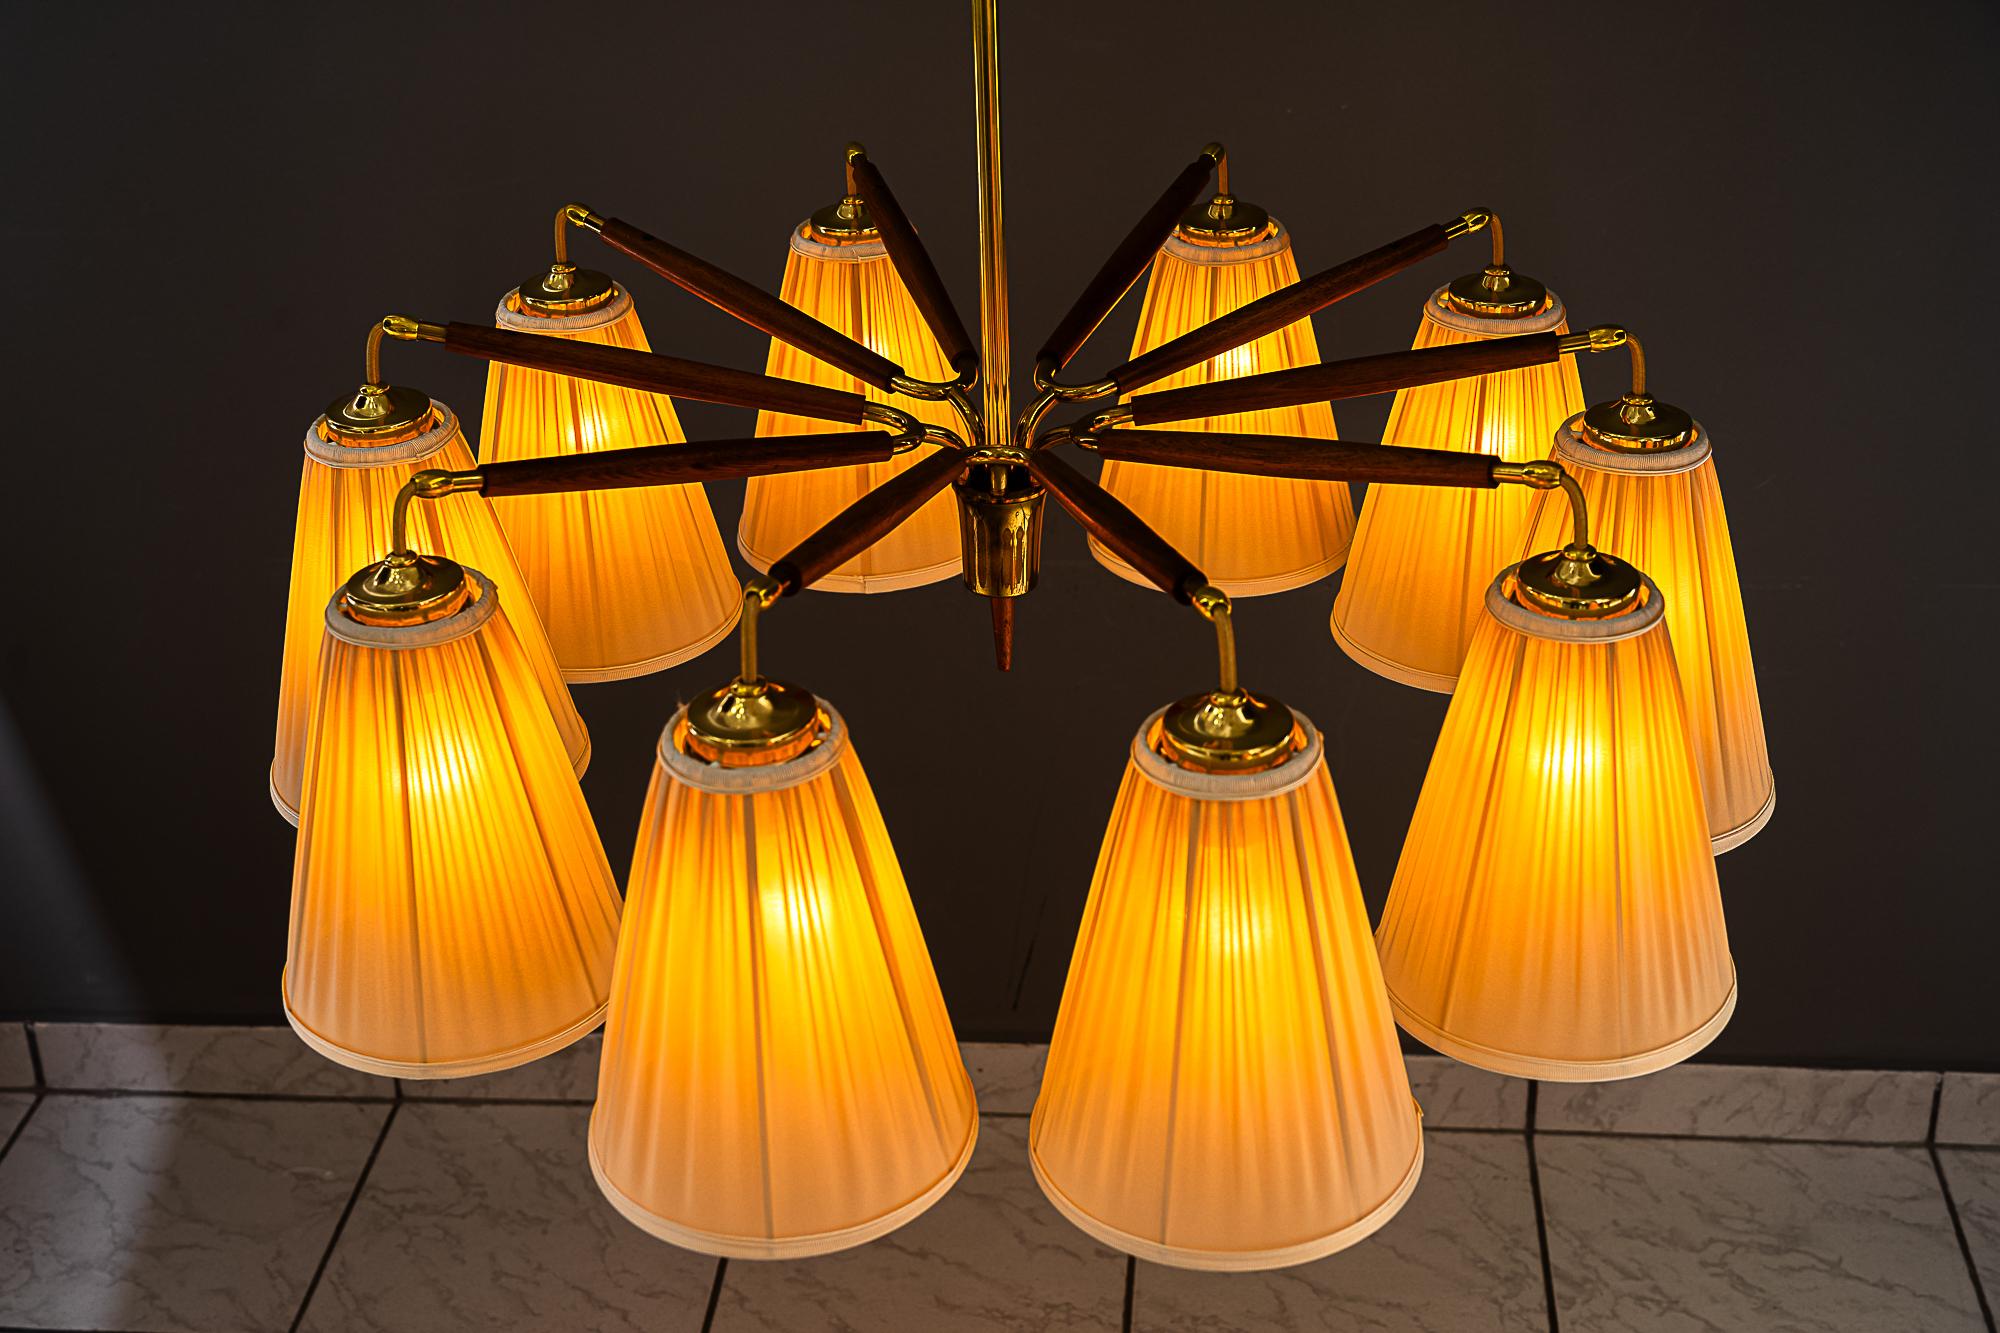 Two Rupert nikoll 10 Arm chandeliers vienna around 1950s In Good Condition For Sale In Wien, AT